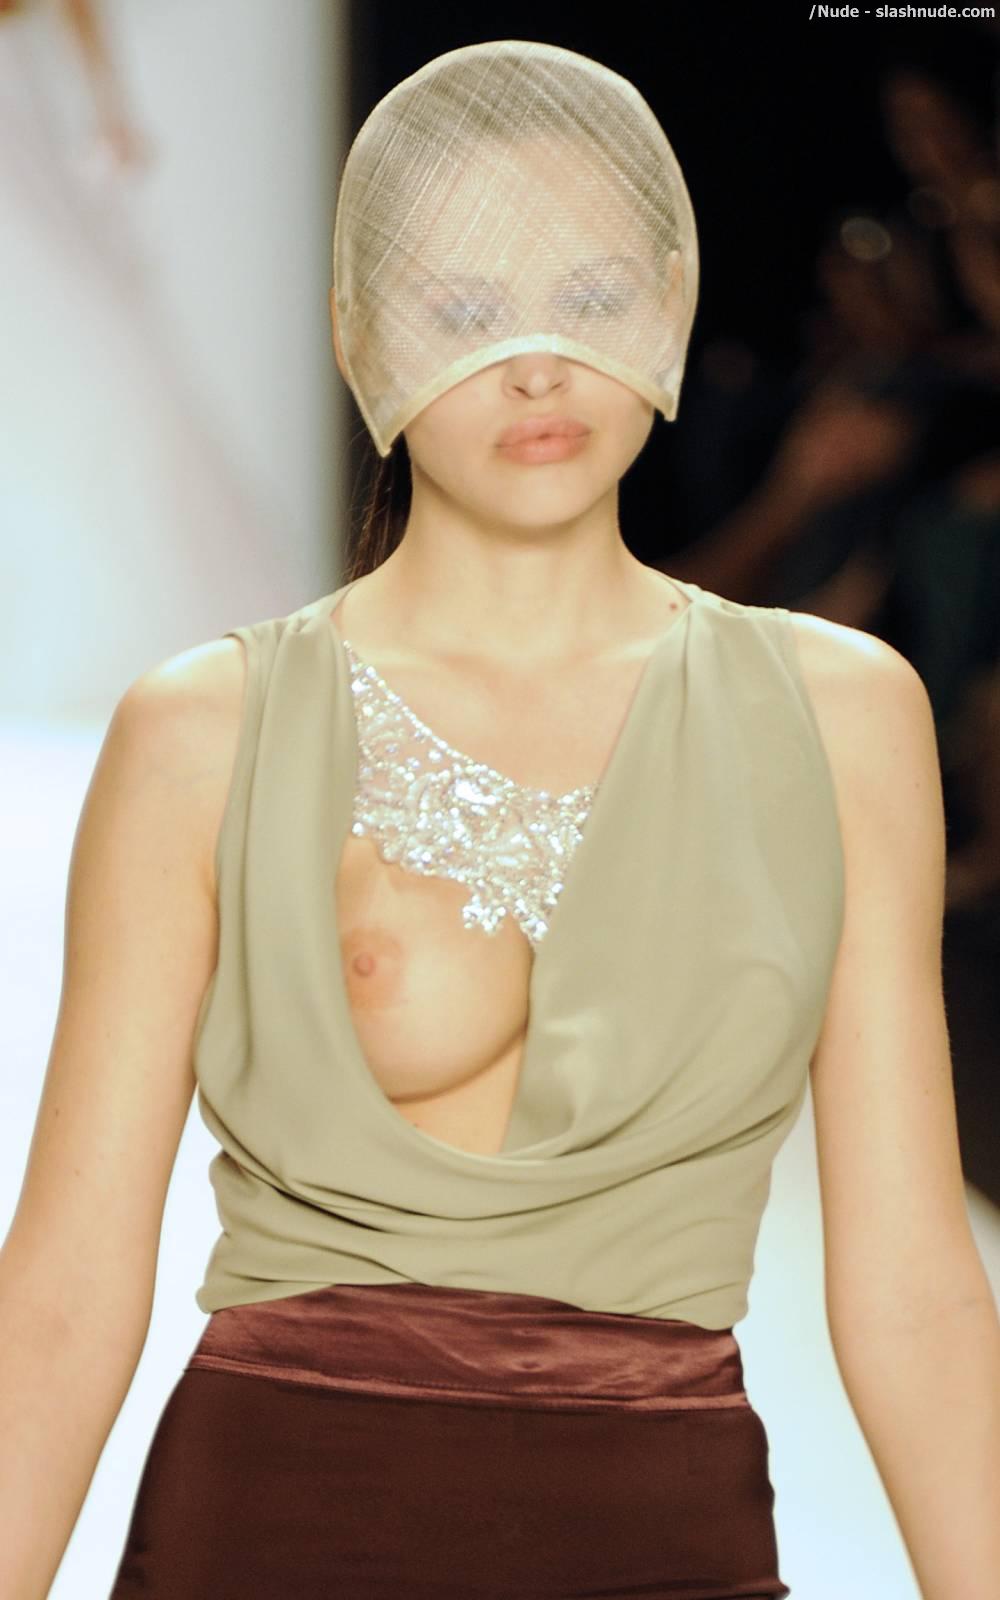 Hana Nitsche Breast Slips Out Of Her Top On Runway 5